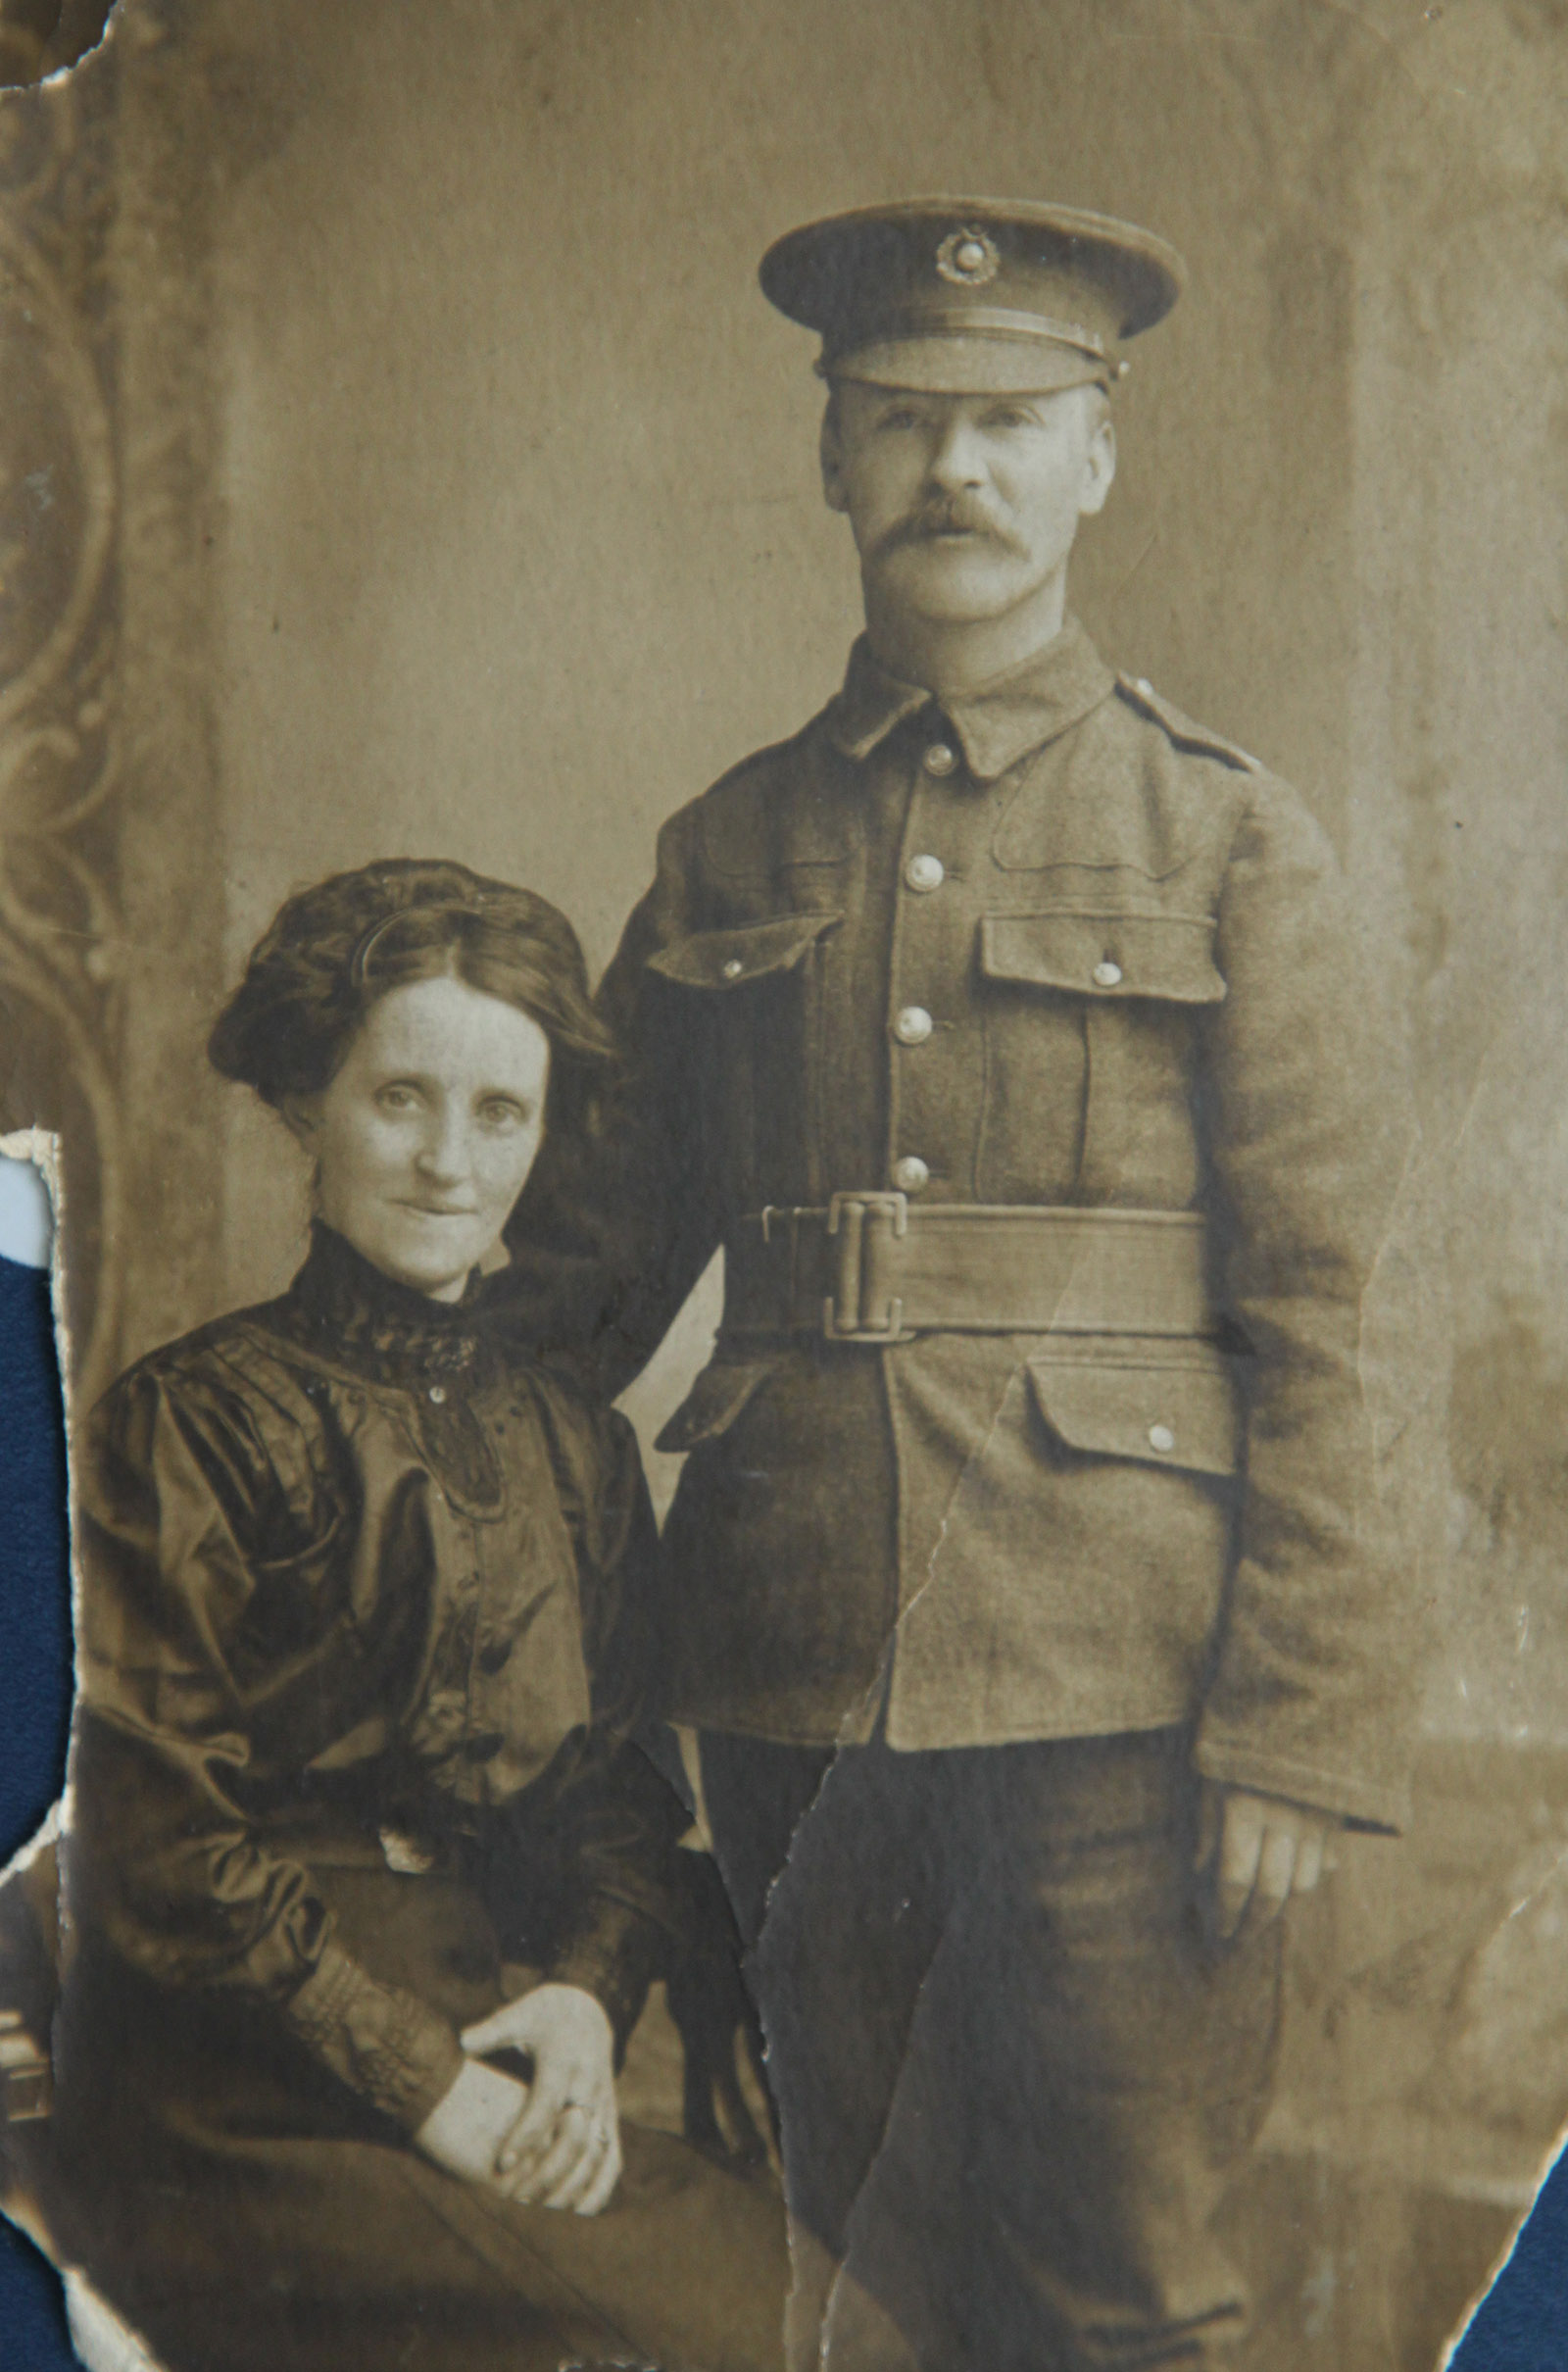 Major Wall’s great-grandfather John Jessup (Light Infantry) and wife Margaret. Tyneside, North East England, about 1914.